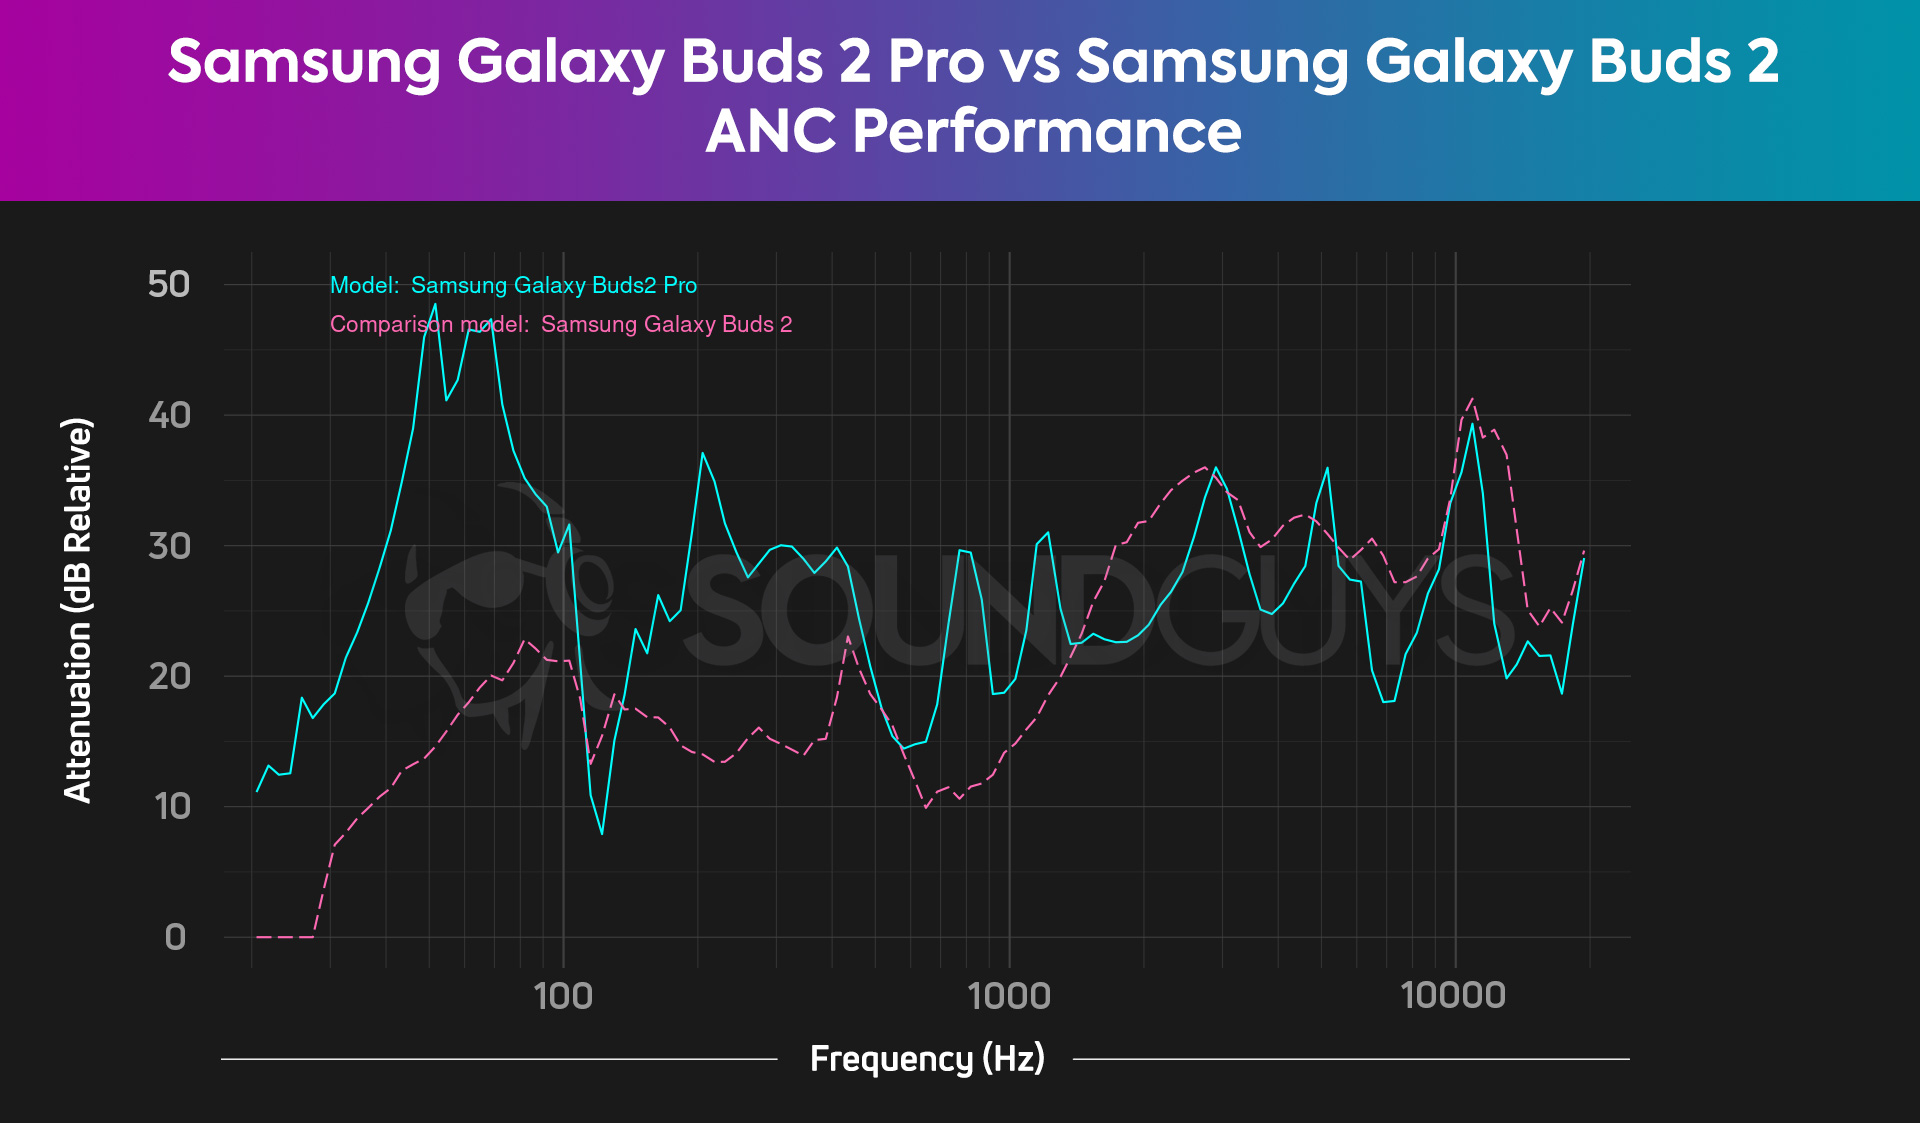 This chart shows the Samsung Galaxy Buds 2 and the Samsung Galaxy Buds 2 Pro combined ANC and isolation performances, wherein the Galaxy Buds 2 Pro filters and blocks more noise.